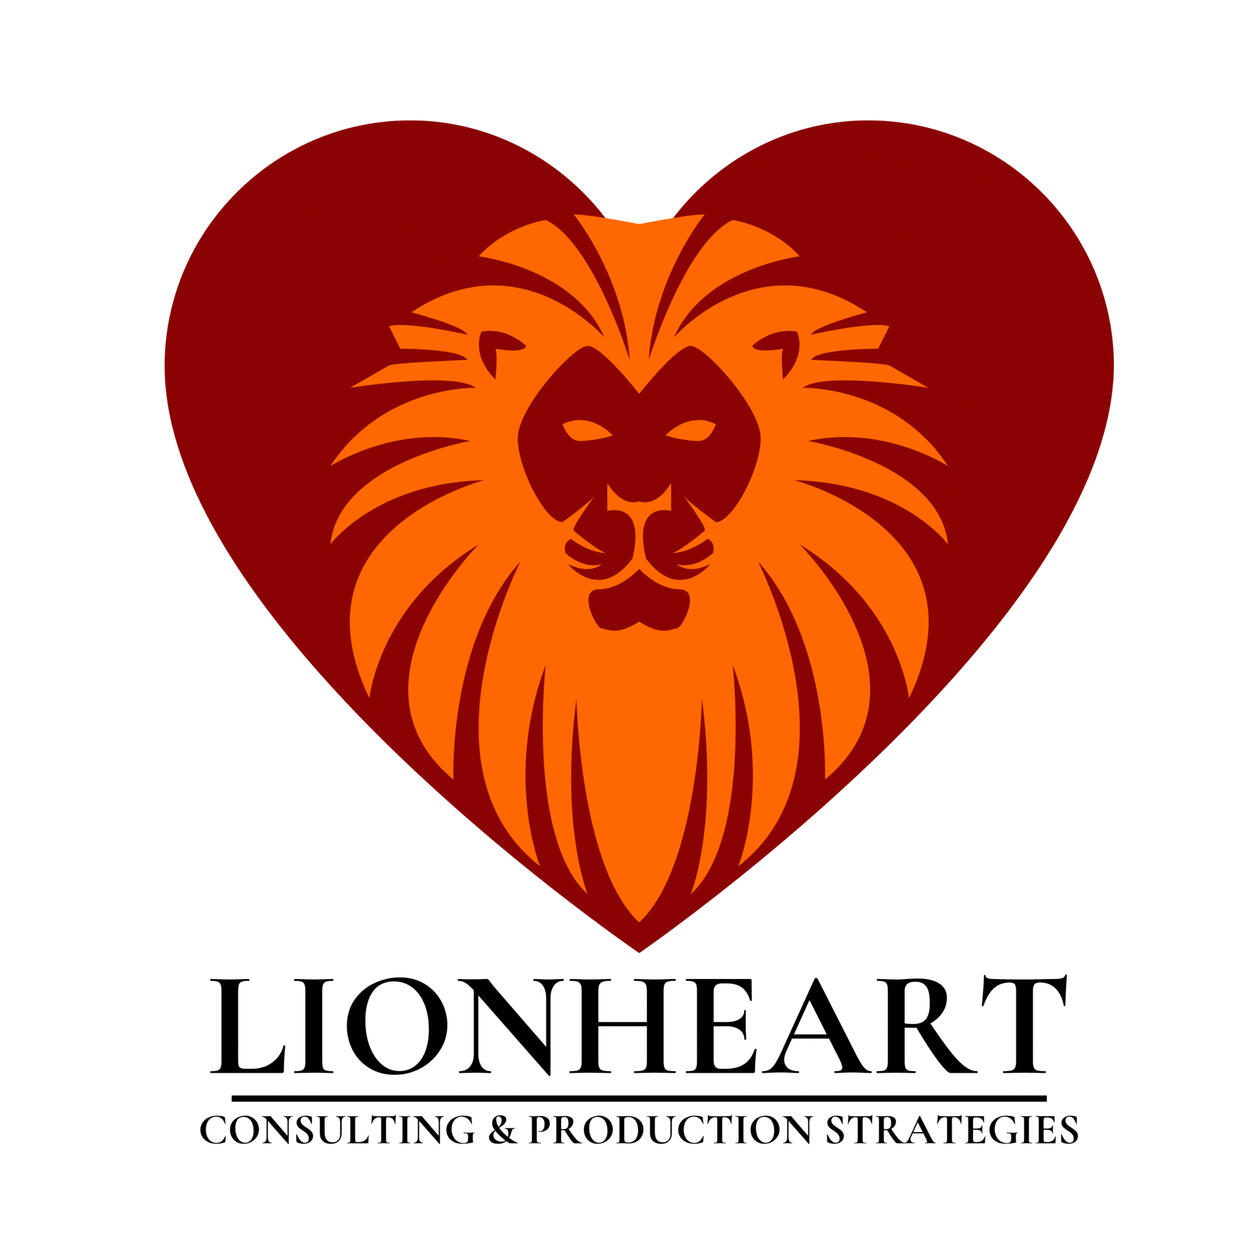 Lionheart Consulting & Production Strategies